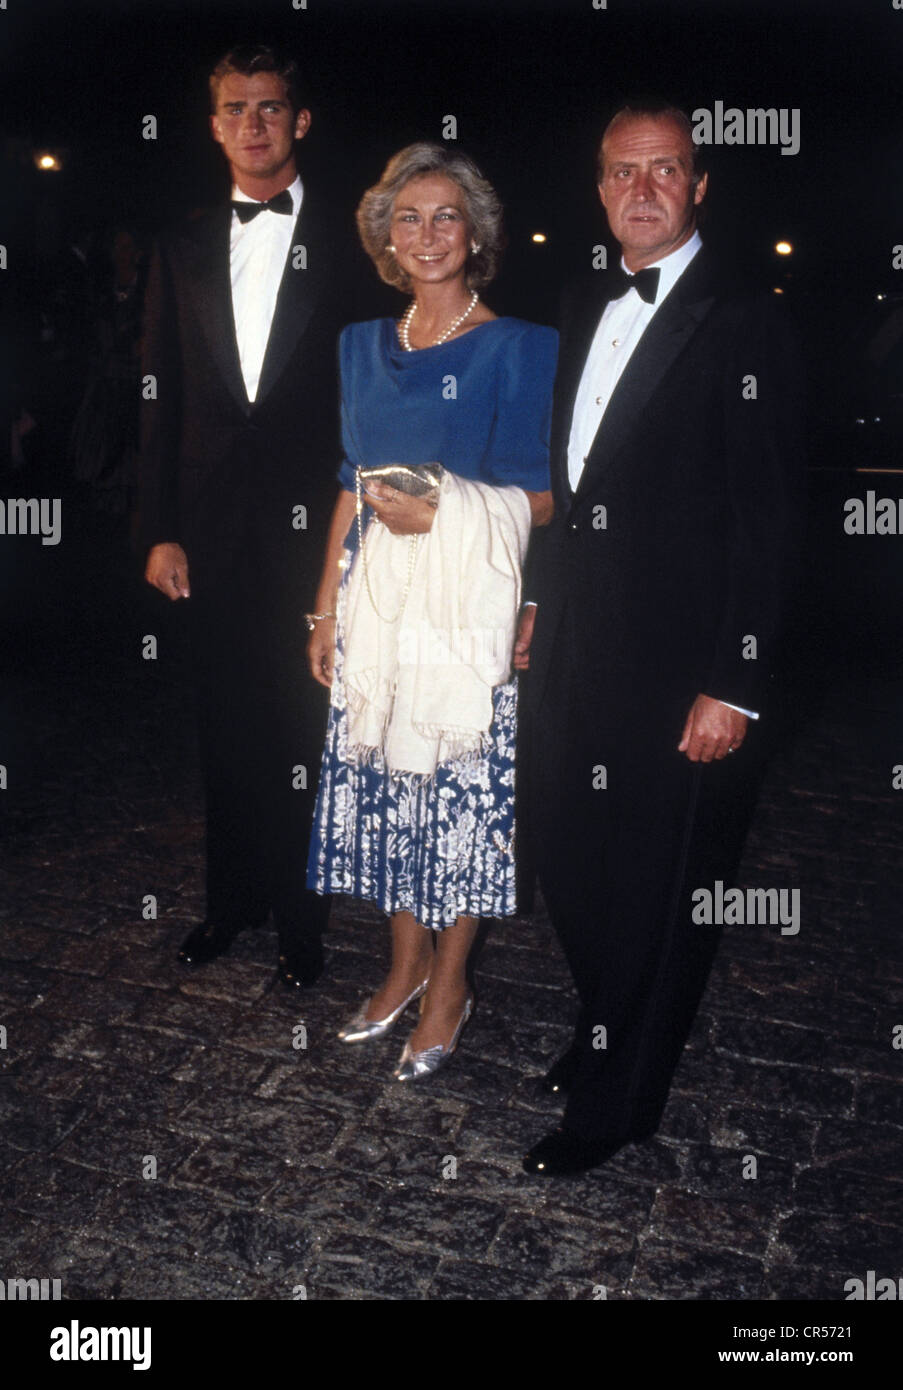 Juan Carlos I, * 5.1.1938, King of Spain since 22.11.1975, with wife Queen Sophia and son Felipe Prince of Asturias, on occasion of the wedding anniversary of King Constantine II and Queen Anne-Marie of Greece, 1998, Stock Photo